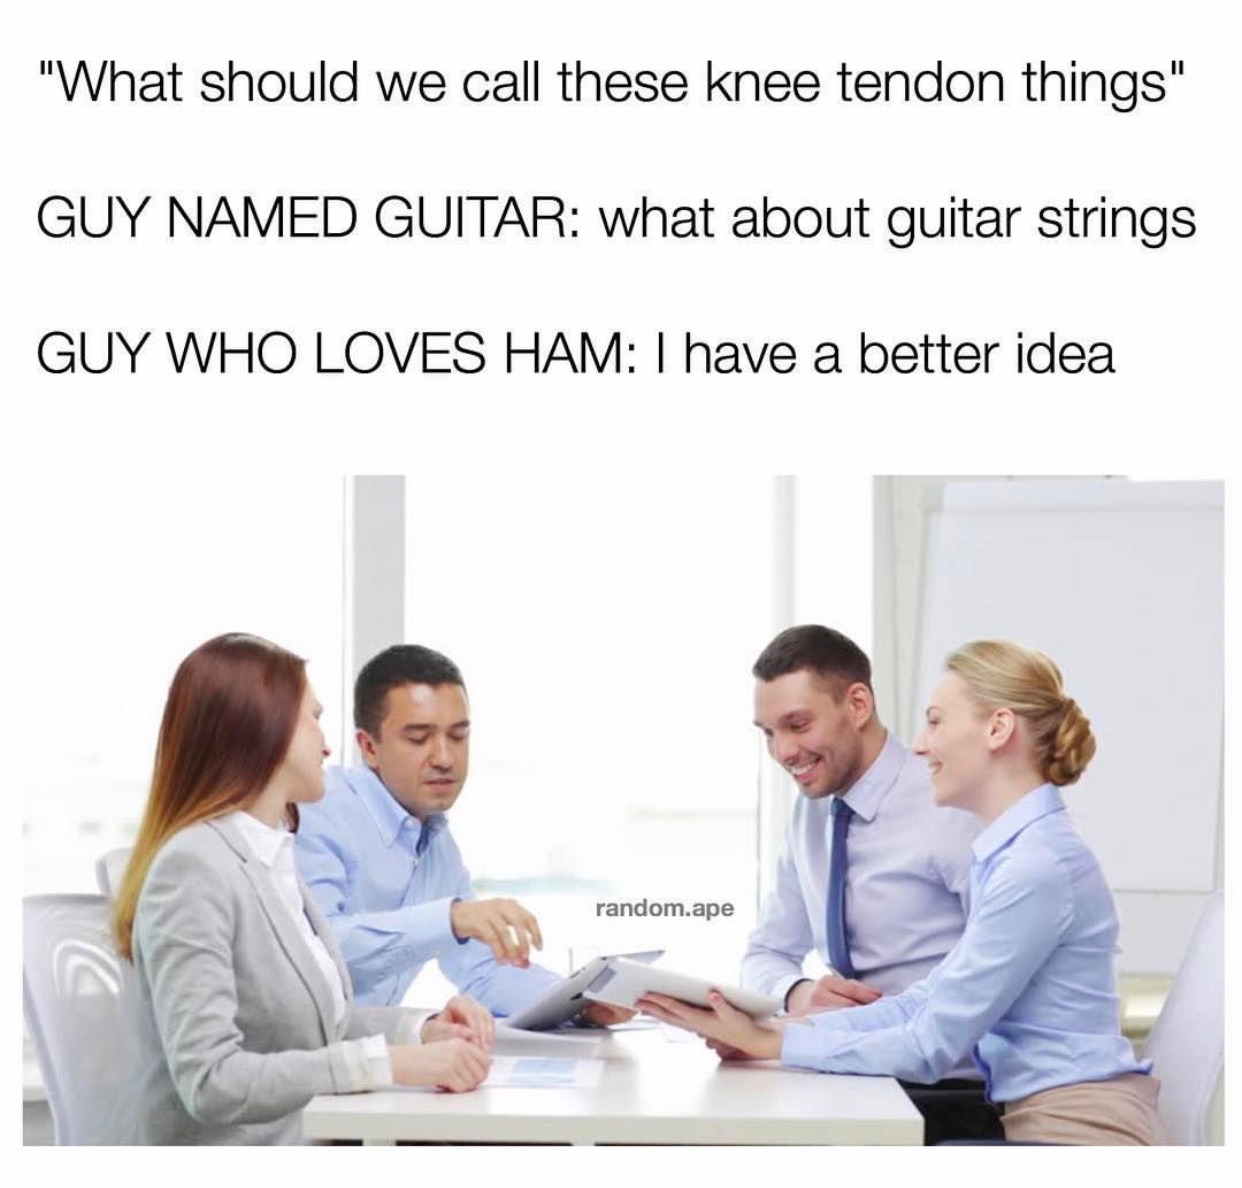 memes - conversation - "What should we call these knee tendon things" Guy Named Guitar what about guitar strings Guy Who Loves Ham I have a better idea random.ape